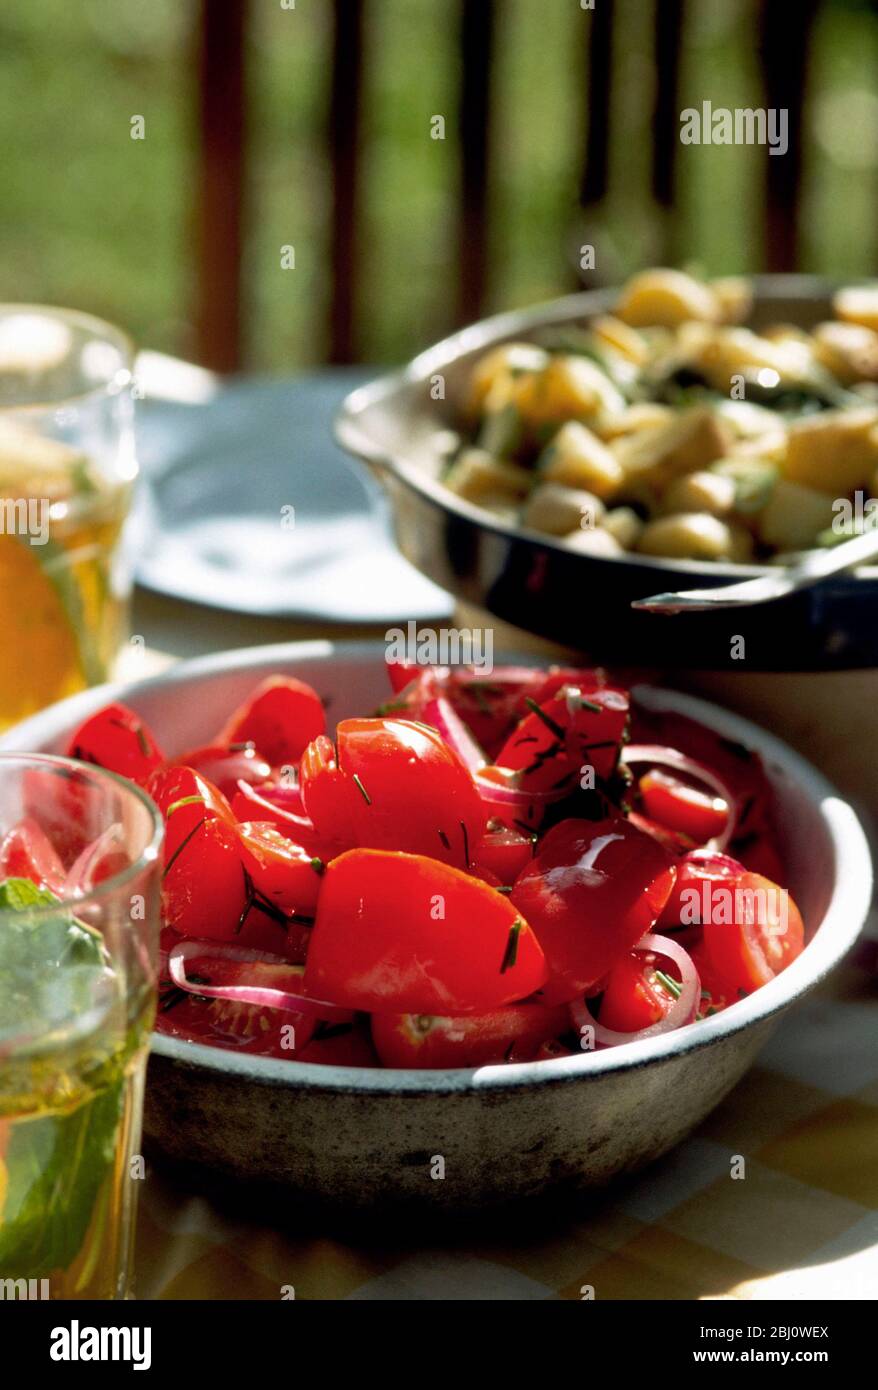 Old metal bowl of tomato salad with soft focus potato salad behind - Stock Photo